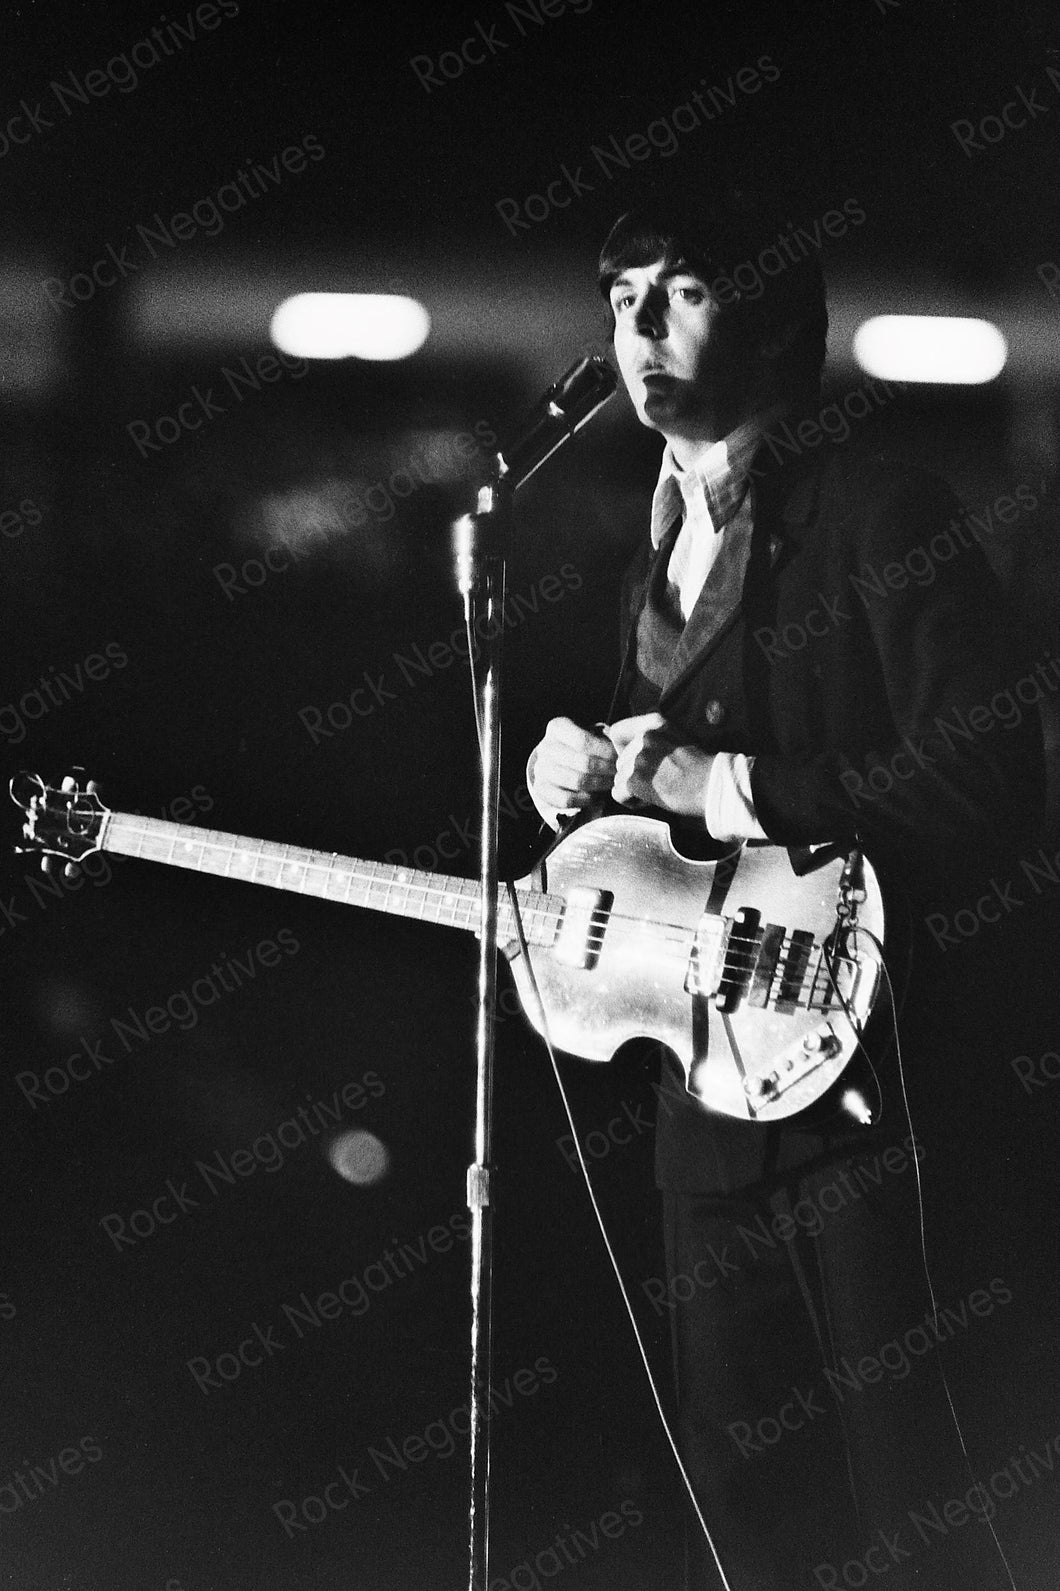 The Beatles Paul McCartney on Stage in St. Louis 1966 Photo Print